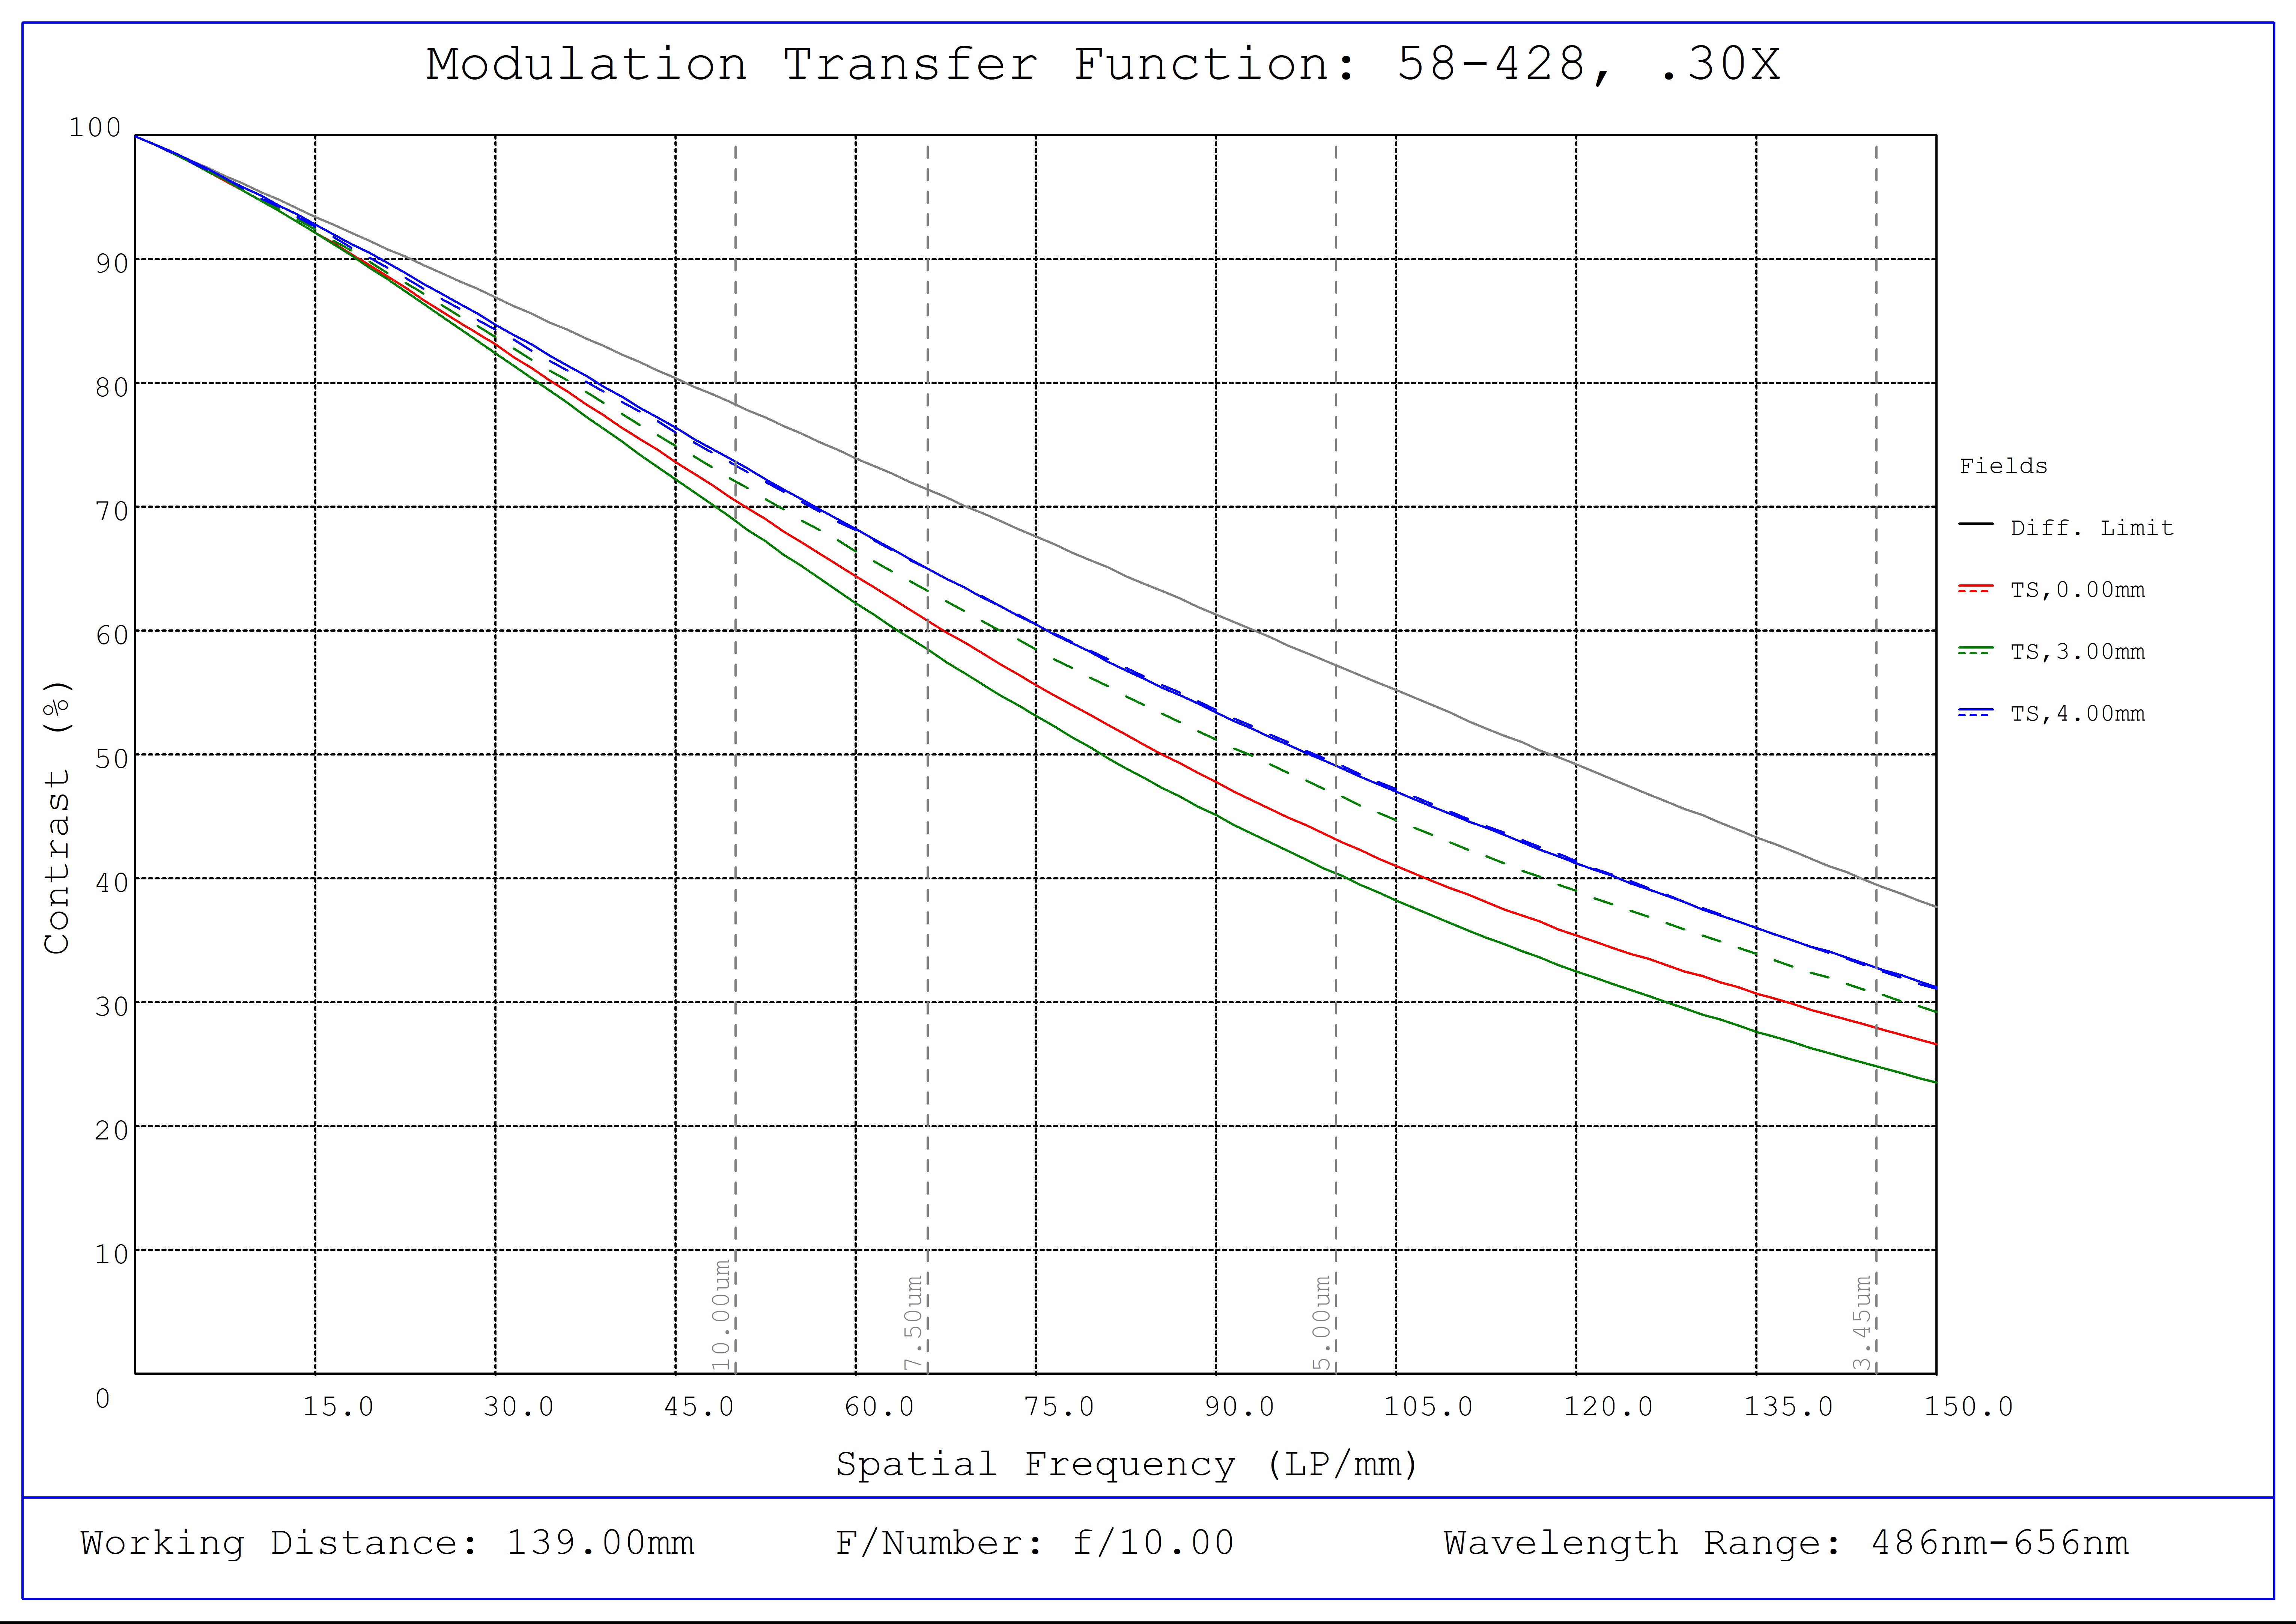 #58-428, 0.30X SilverTL™ Telecentric Lens, Modulated Transfer Function (MTF) Plot, 139mm Working Distance, f10